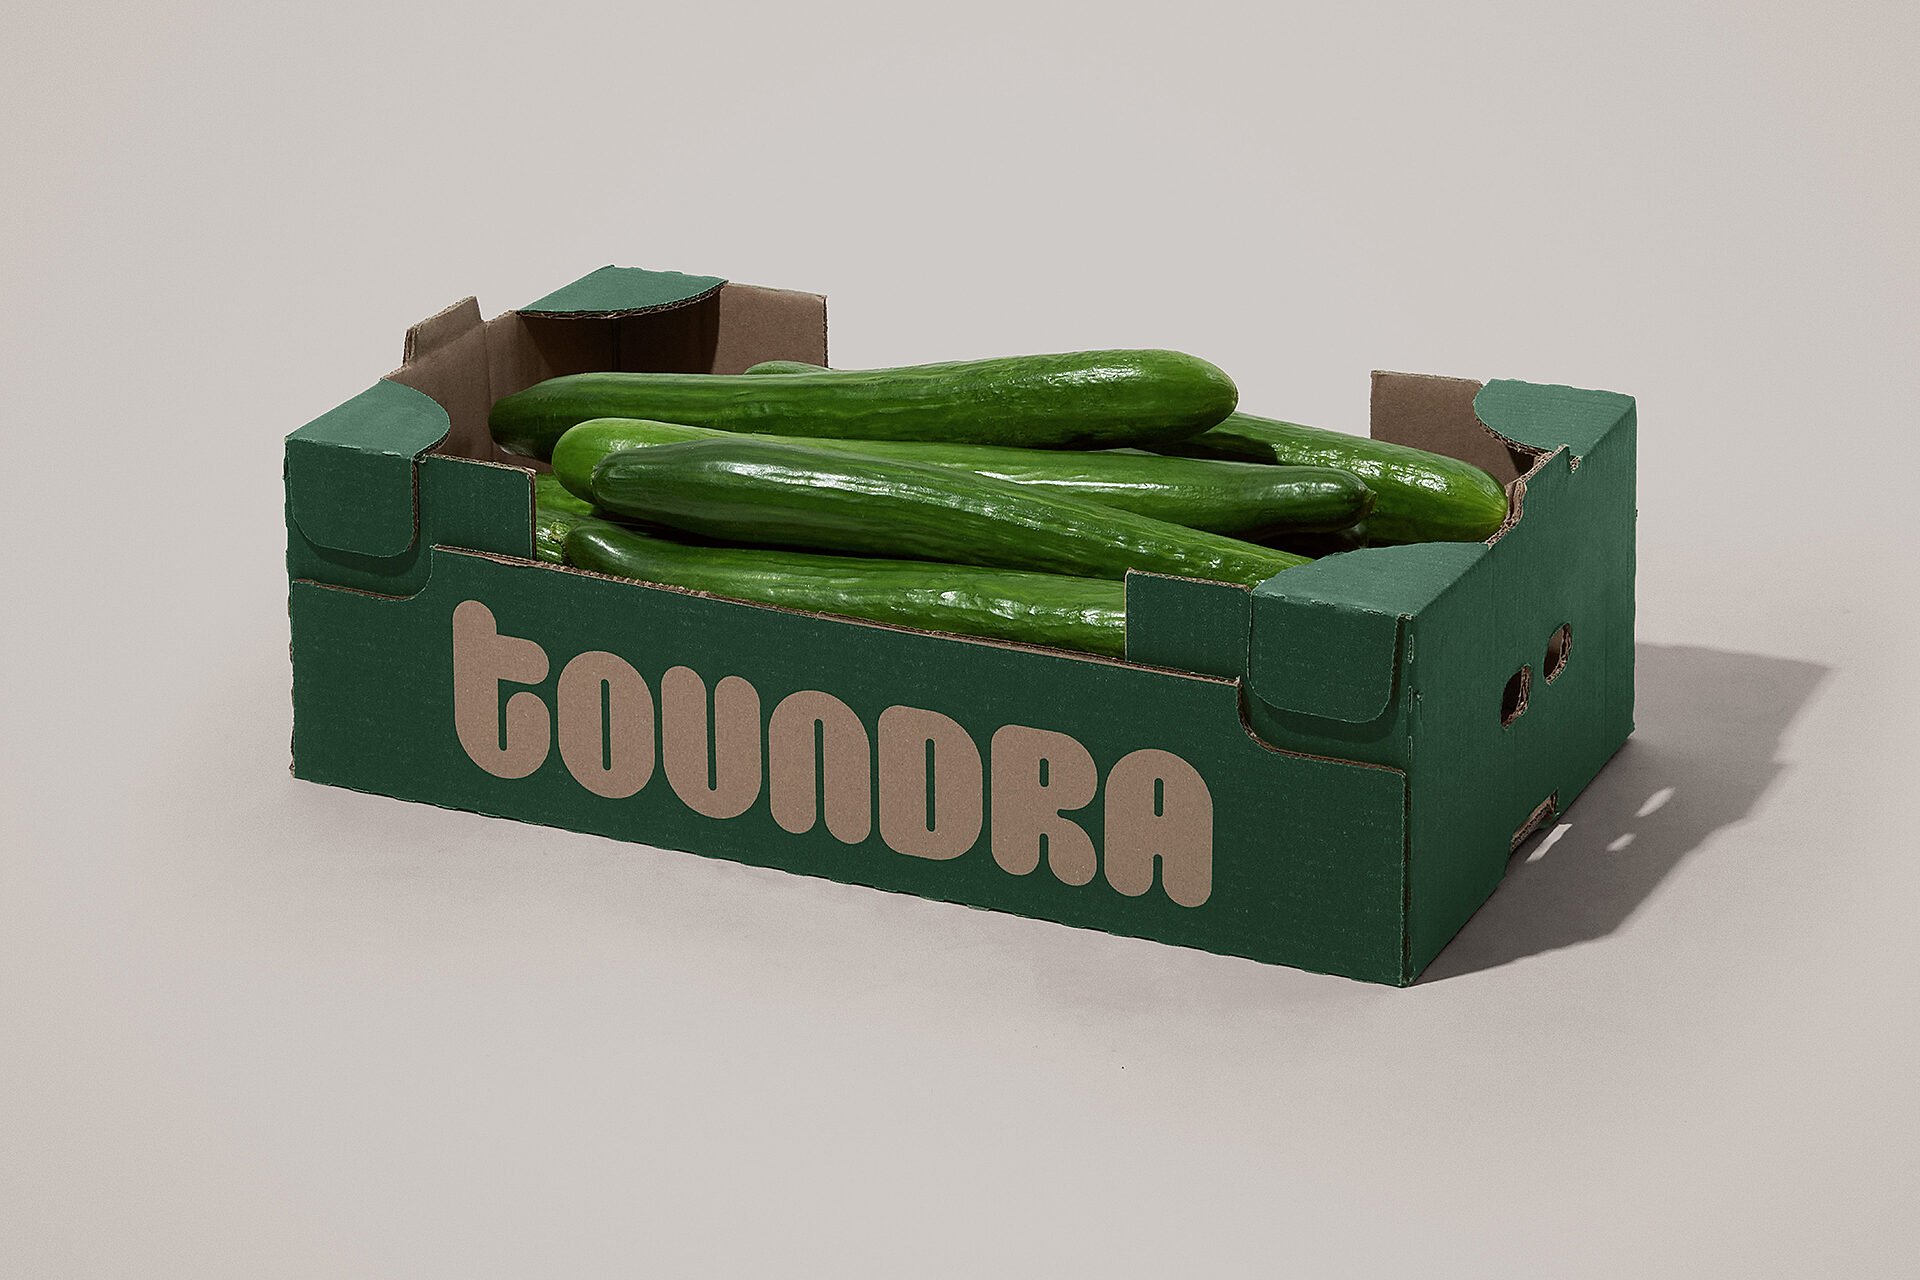 New logotype, illustration and website for Canadian cucumber brand Toundra designed by LG2